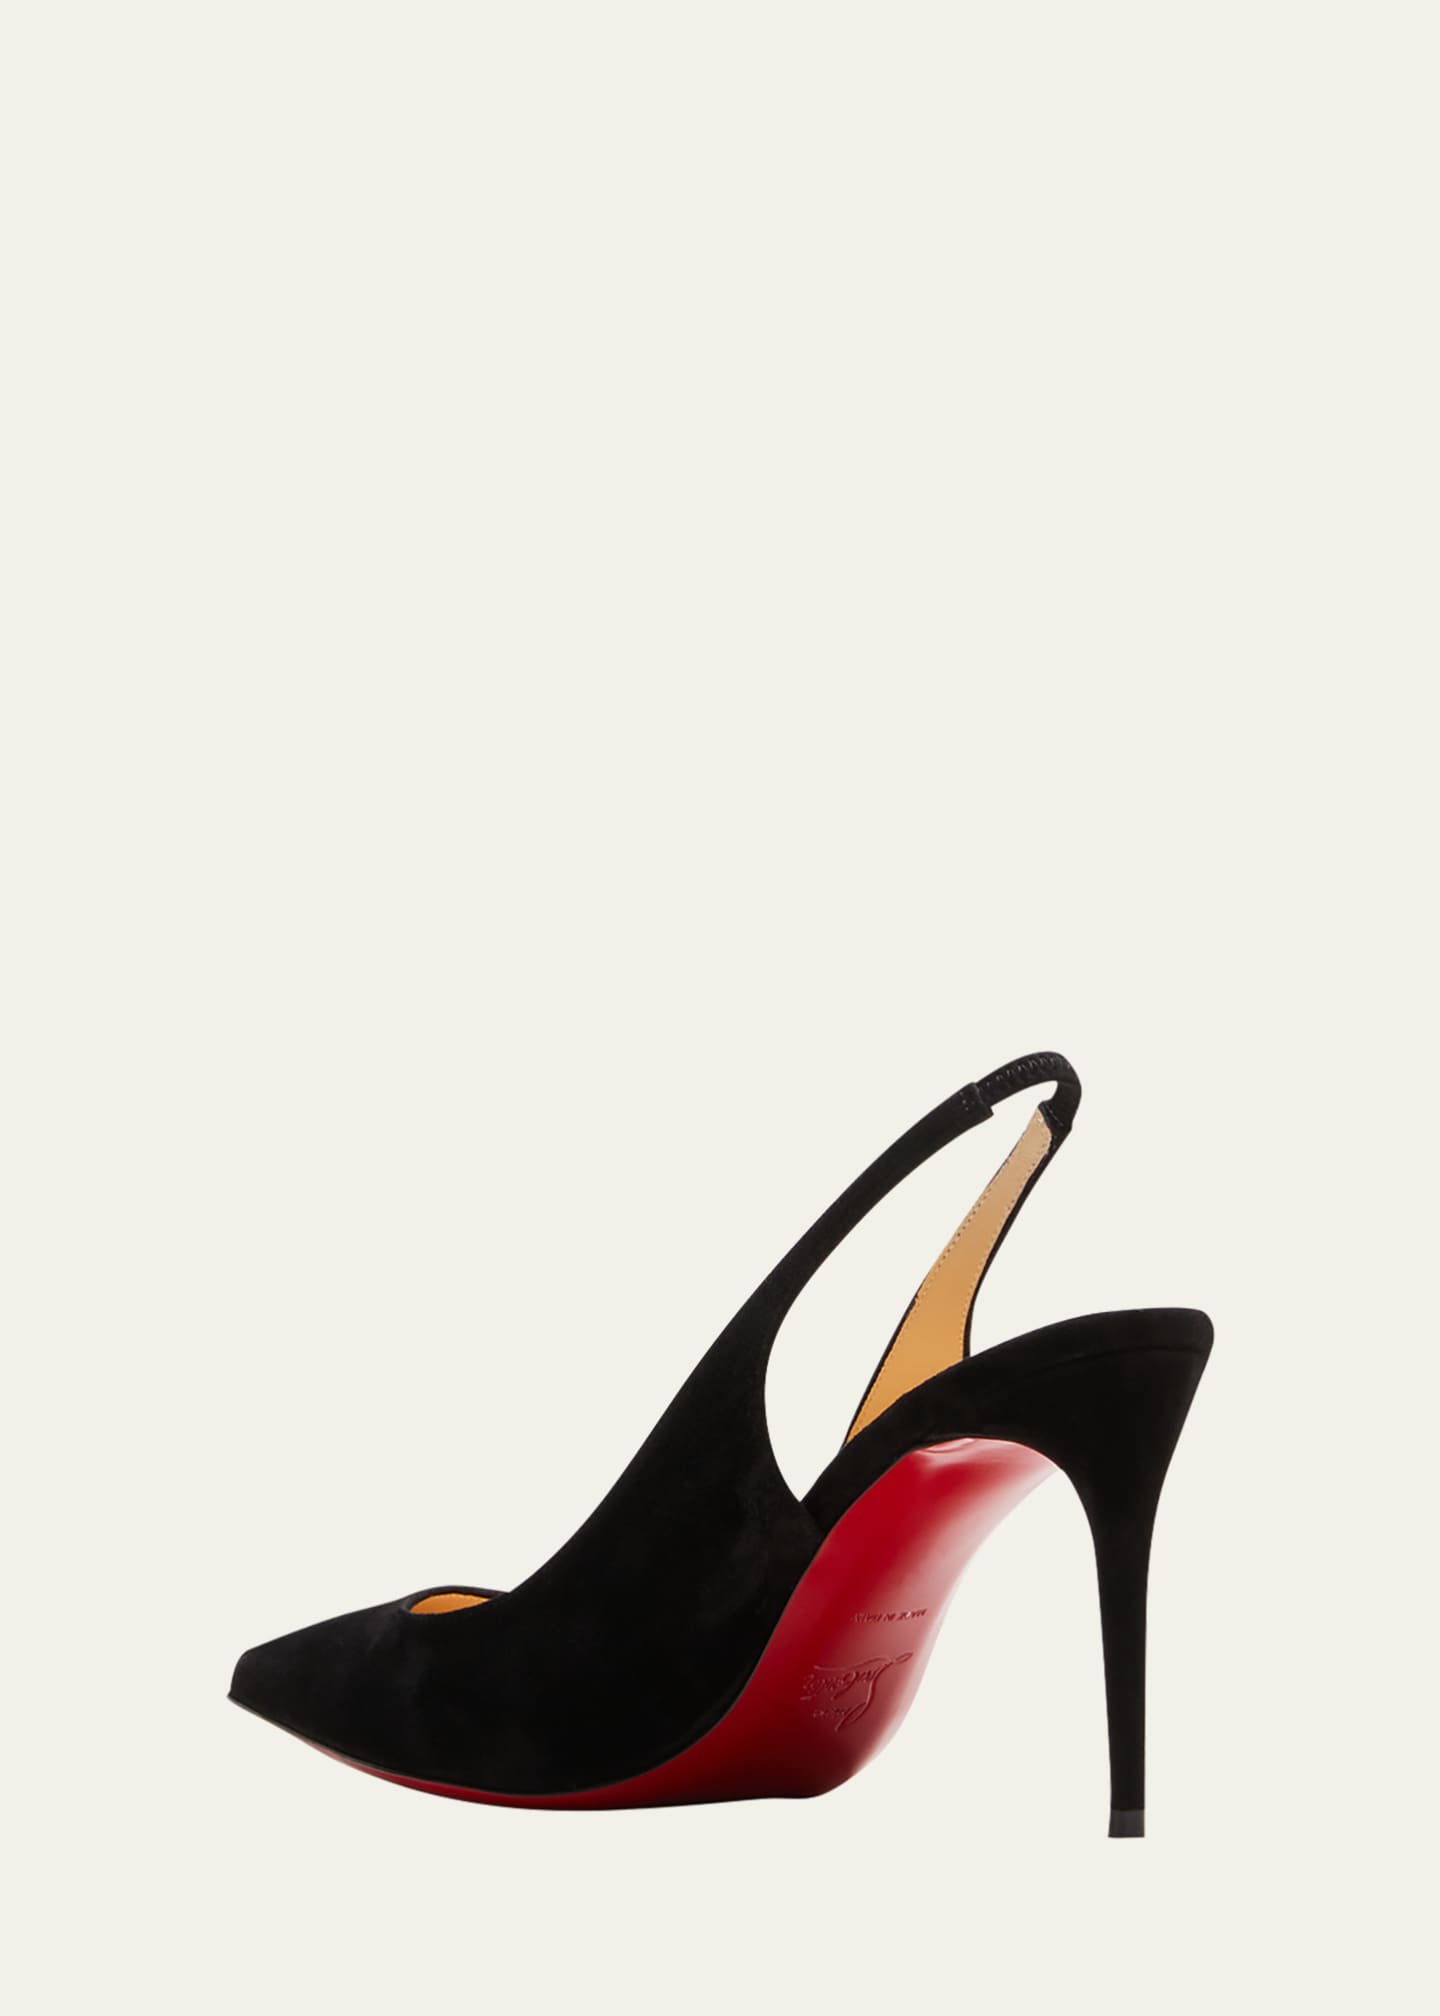 Christian Louboutin Kate Suede Red Sole Slingback Pumps - Bergdorf Goodman